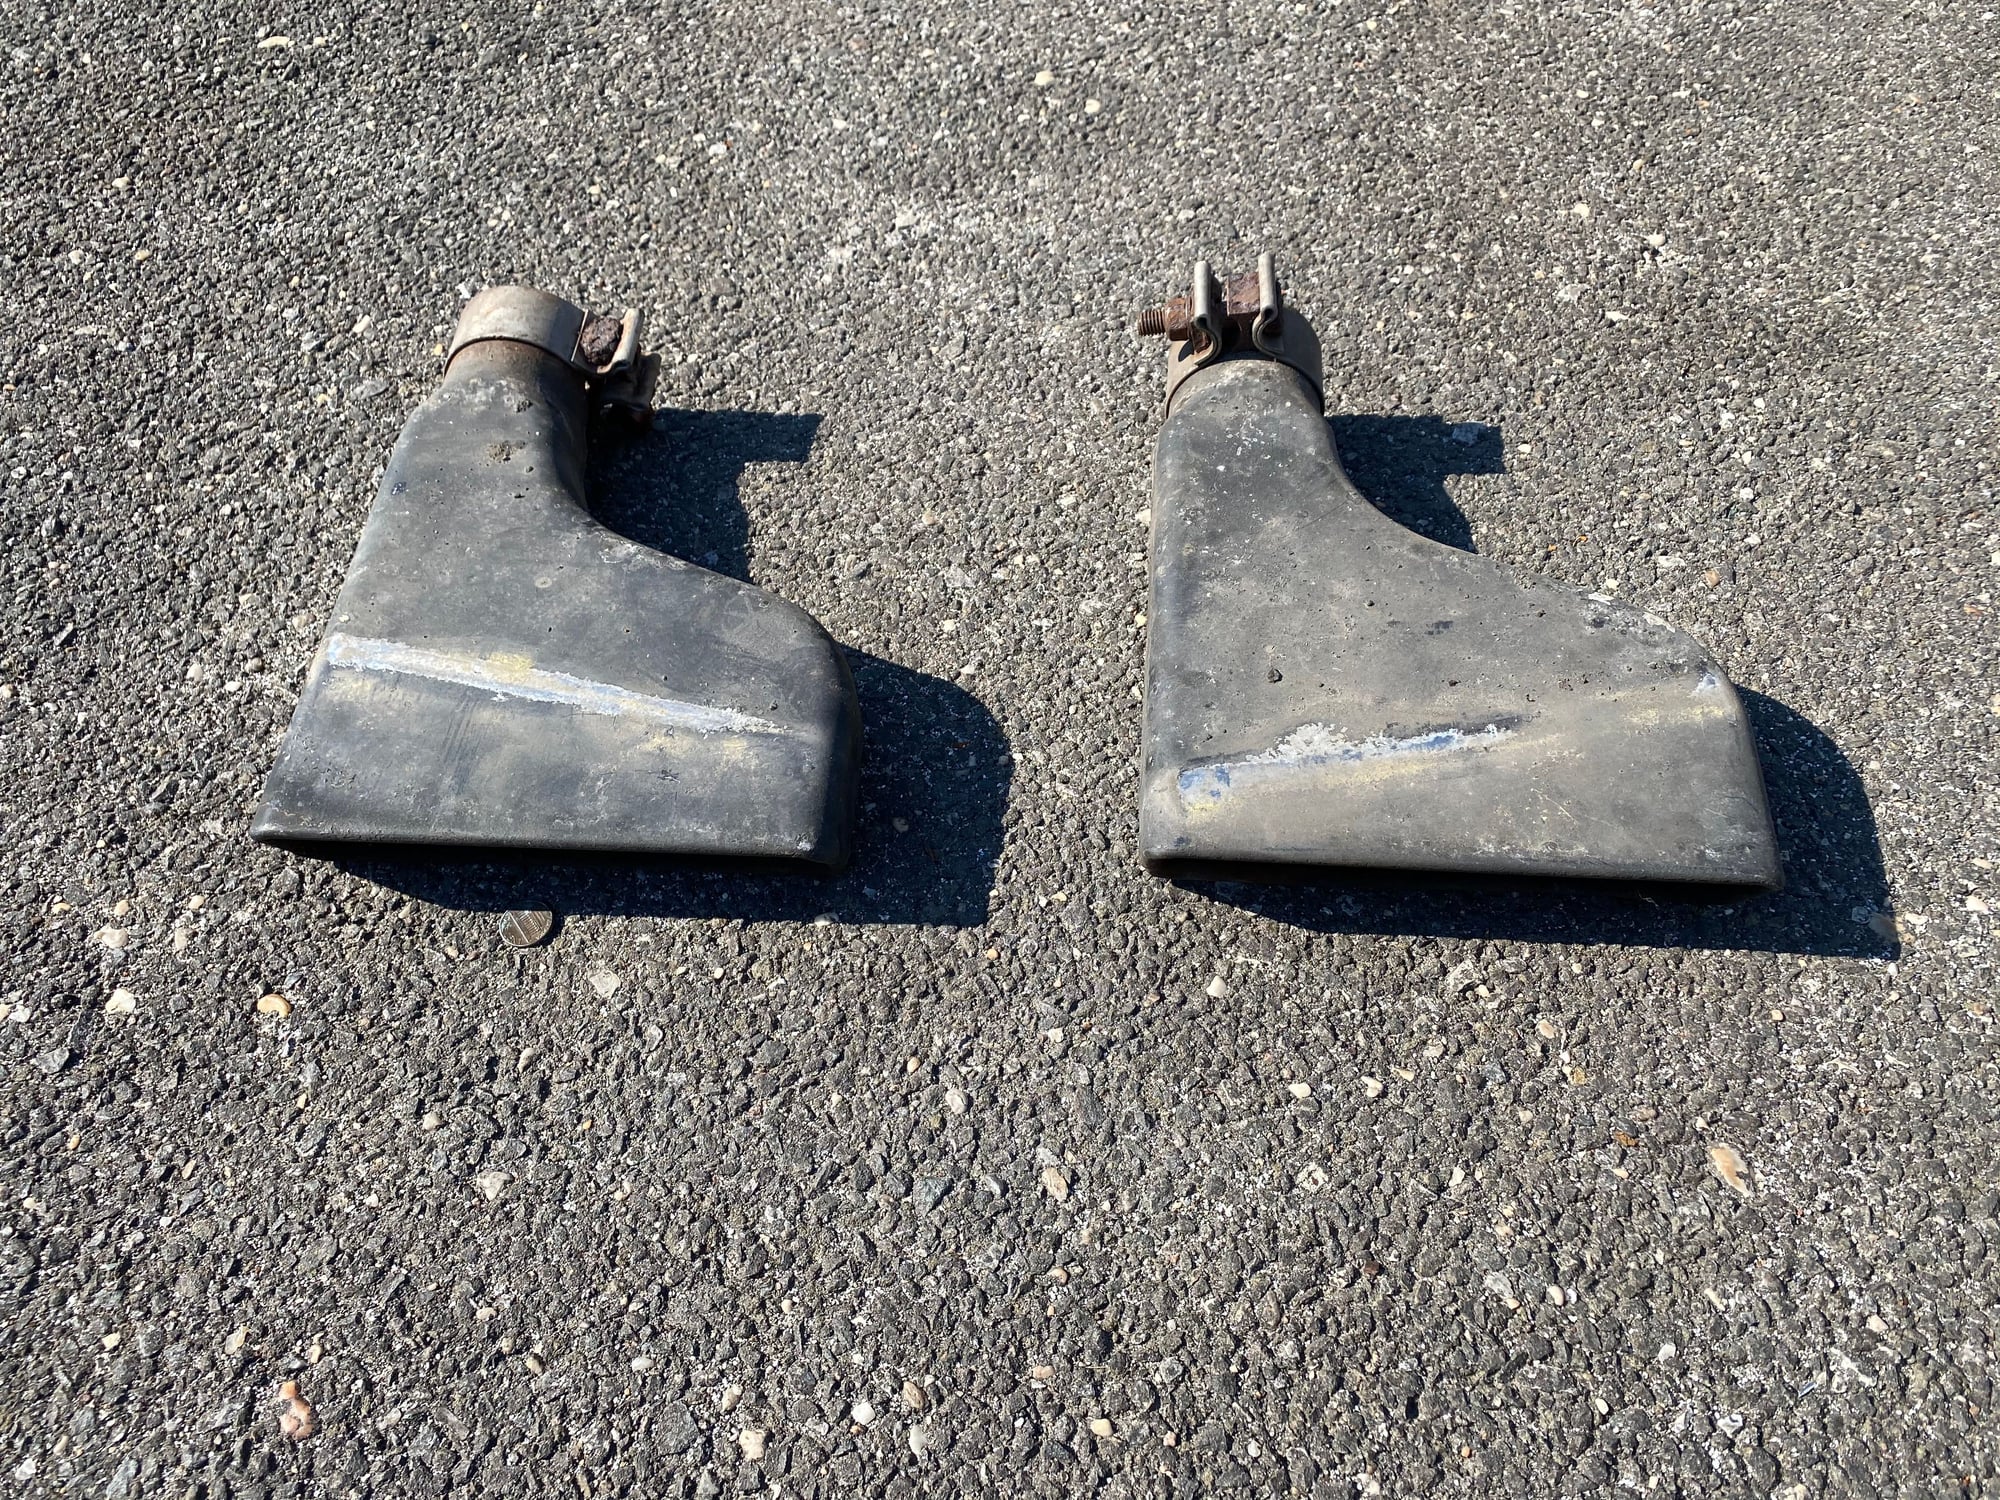 Engine - Exhaust - Stock camaro exhaust tips - Used - 0  All Models - Seaford, NY 11783, United States